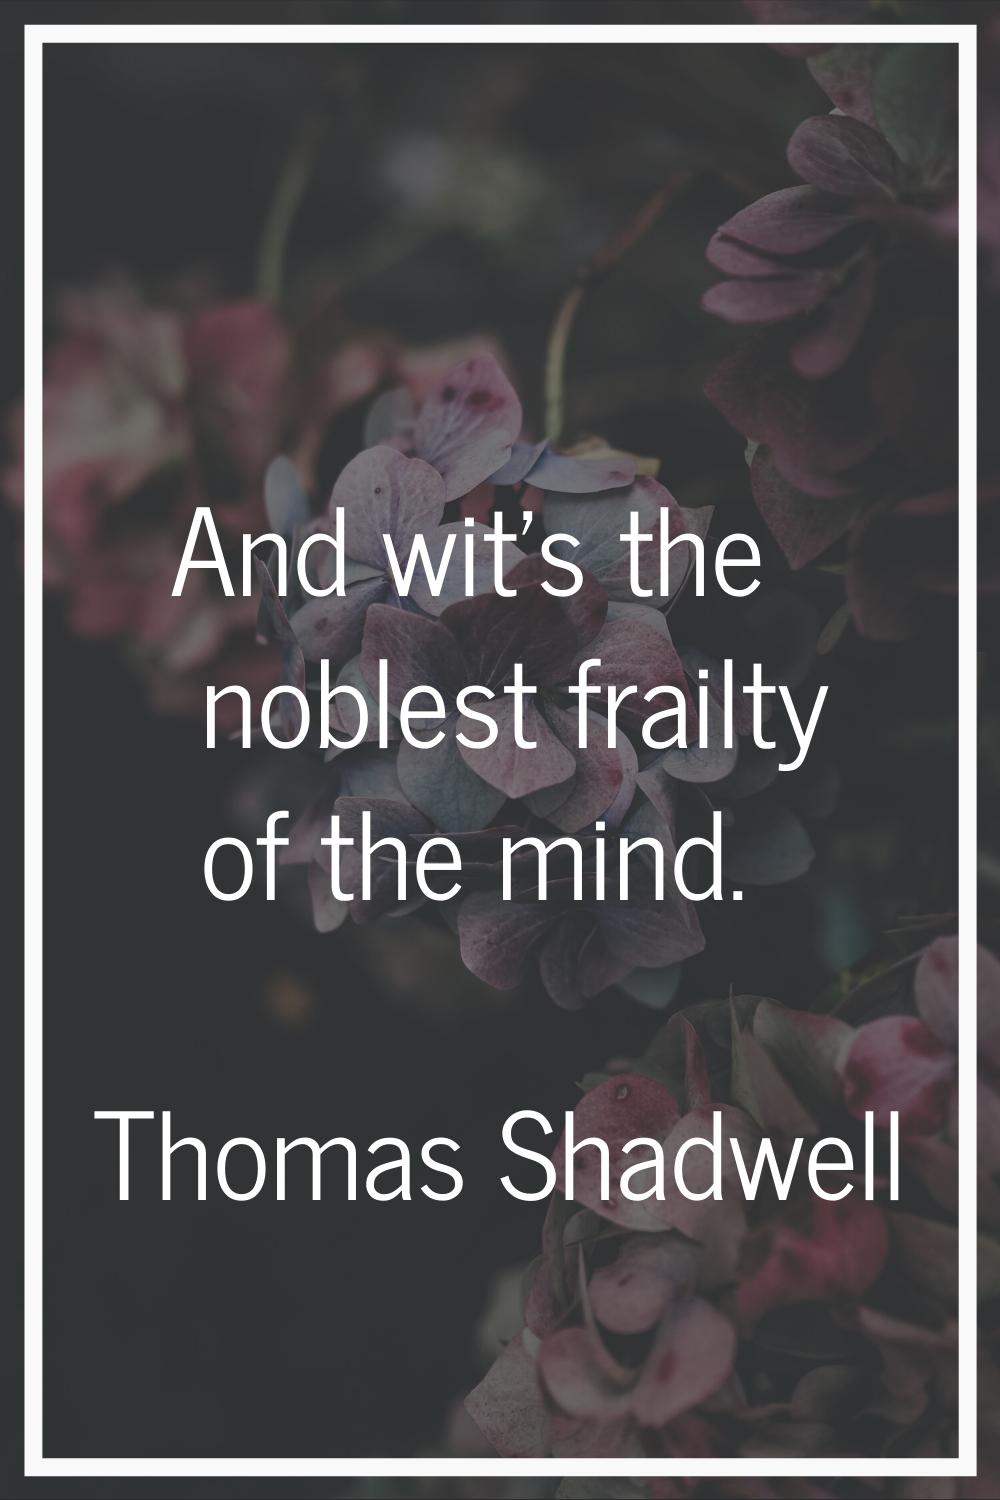 And wit's the noblest frailty of the mind.